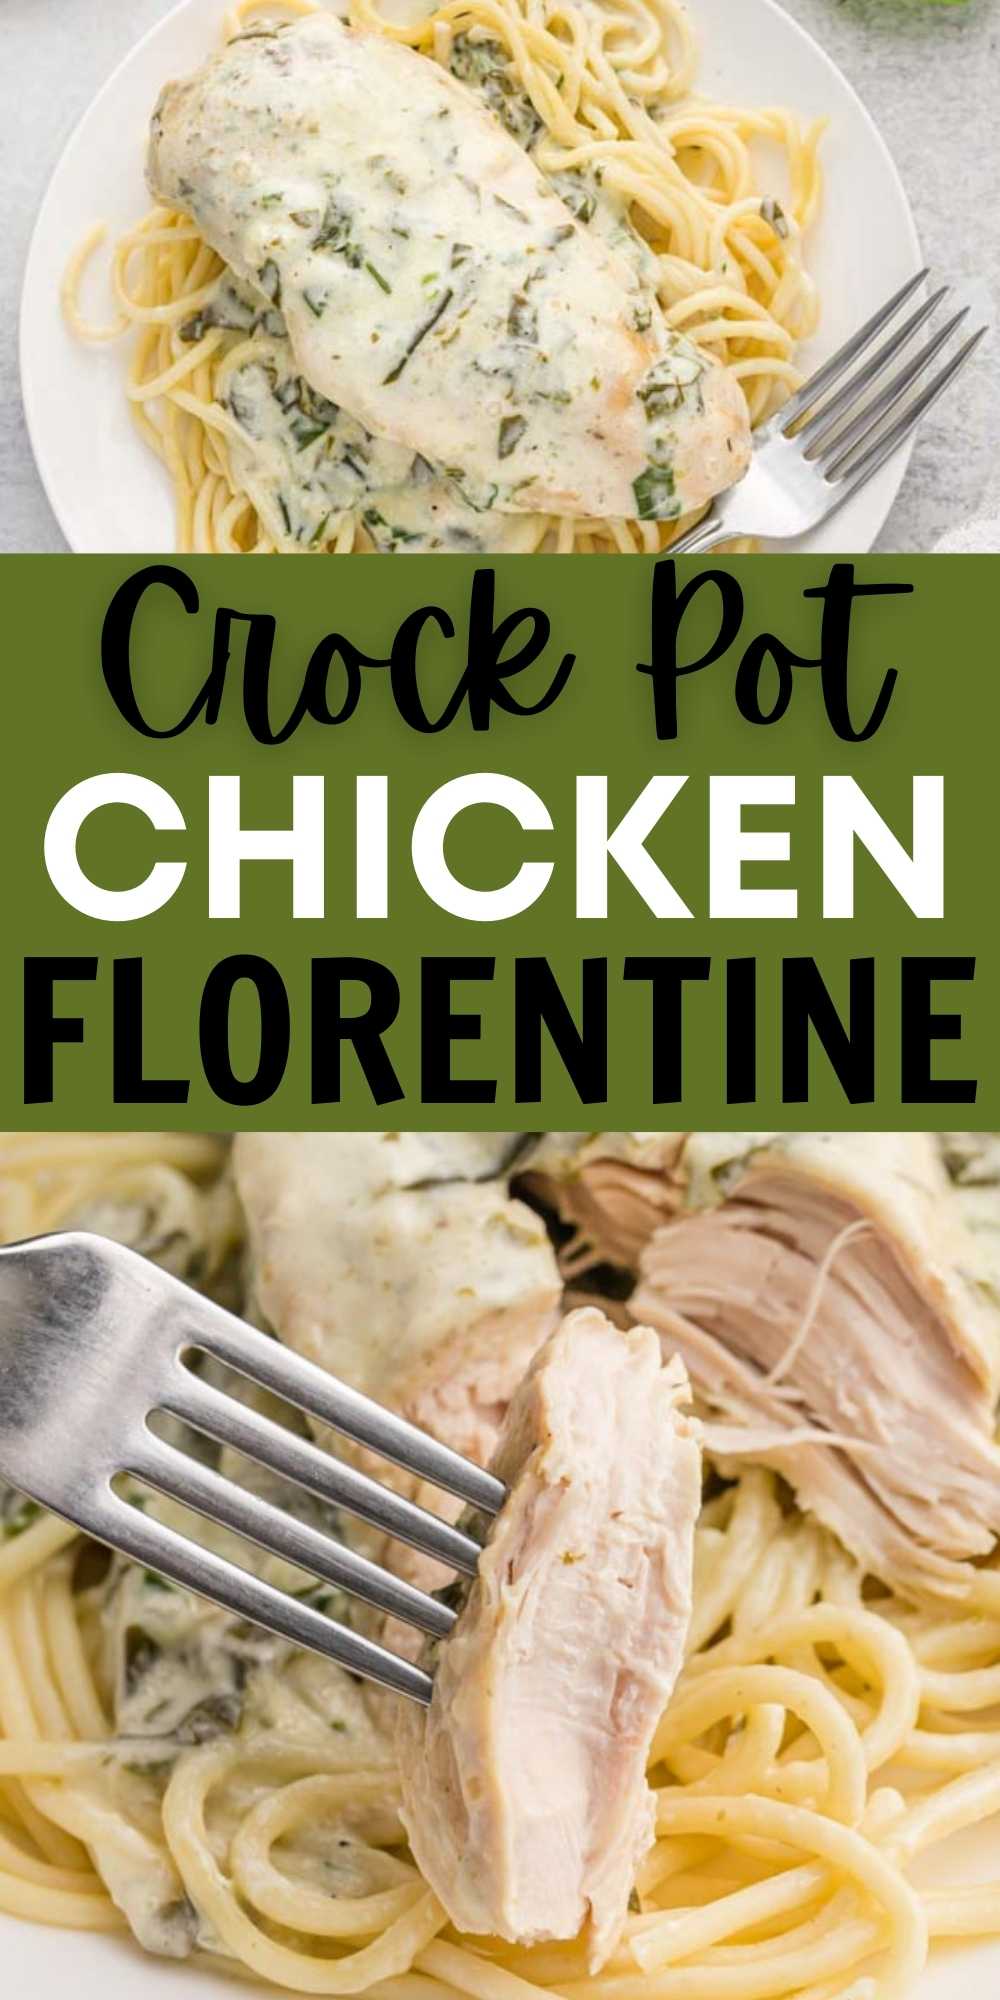 Crock Pot Chicken Florentine Recipe is a delicious dinner idea full of creamy sauce. Cheese, spinach and more make this recipe so tasty. Serve over pasta for an amazing meal. #eatingonadime #chickenflorentine #crockpotrecipes